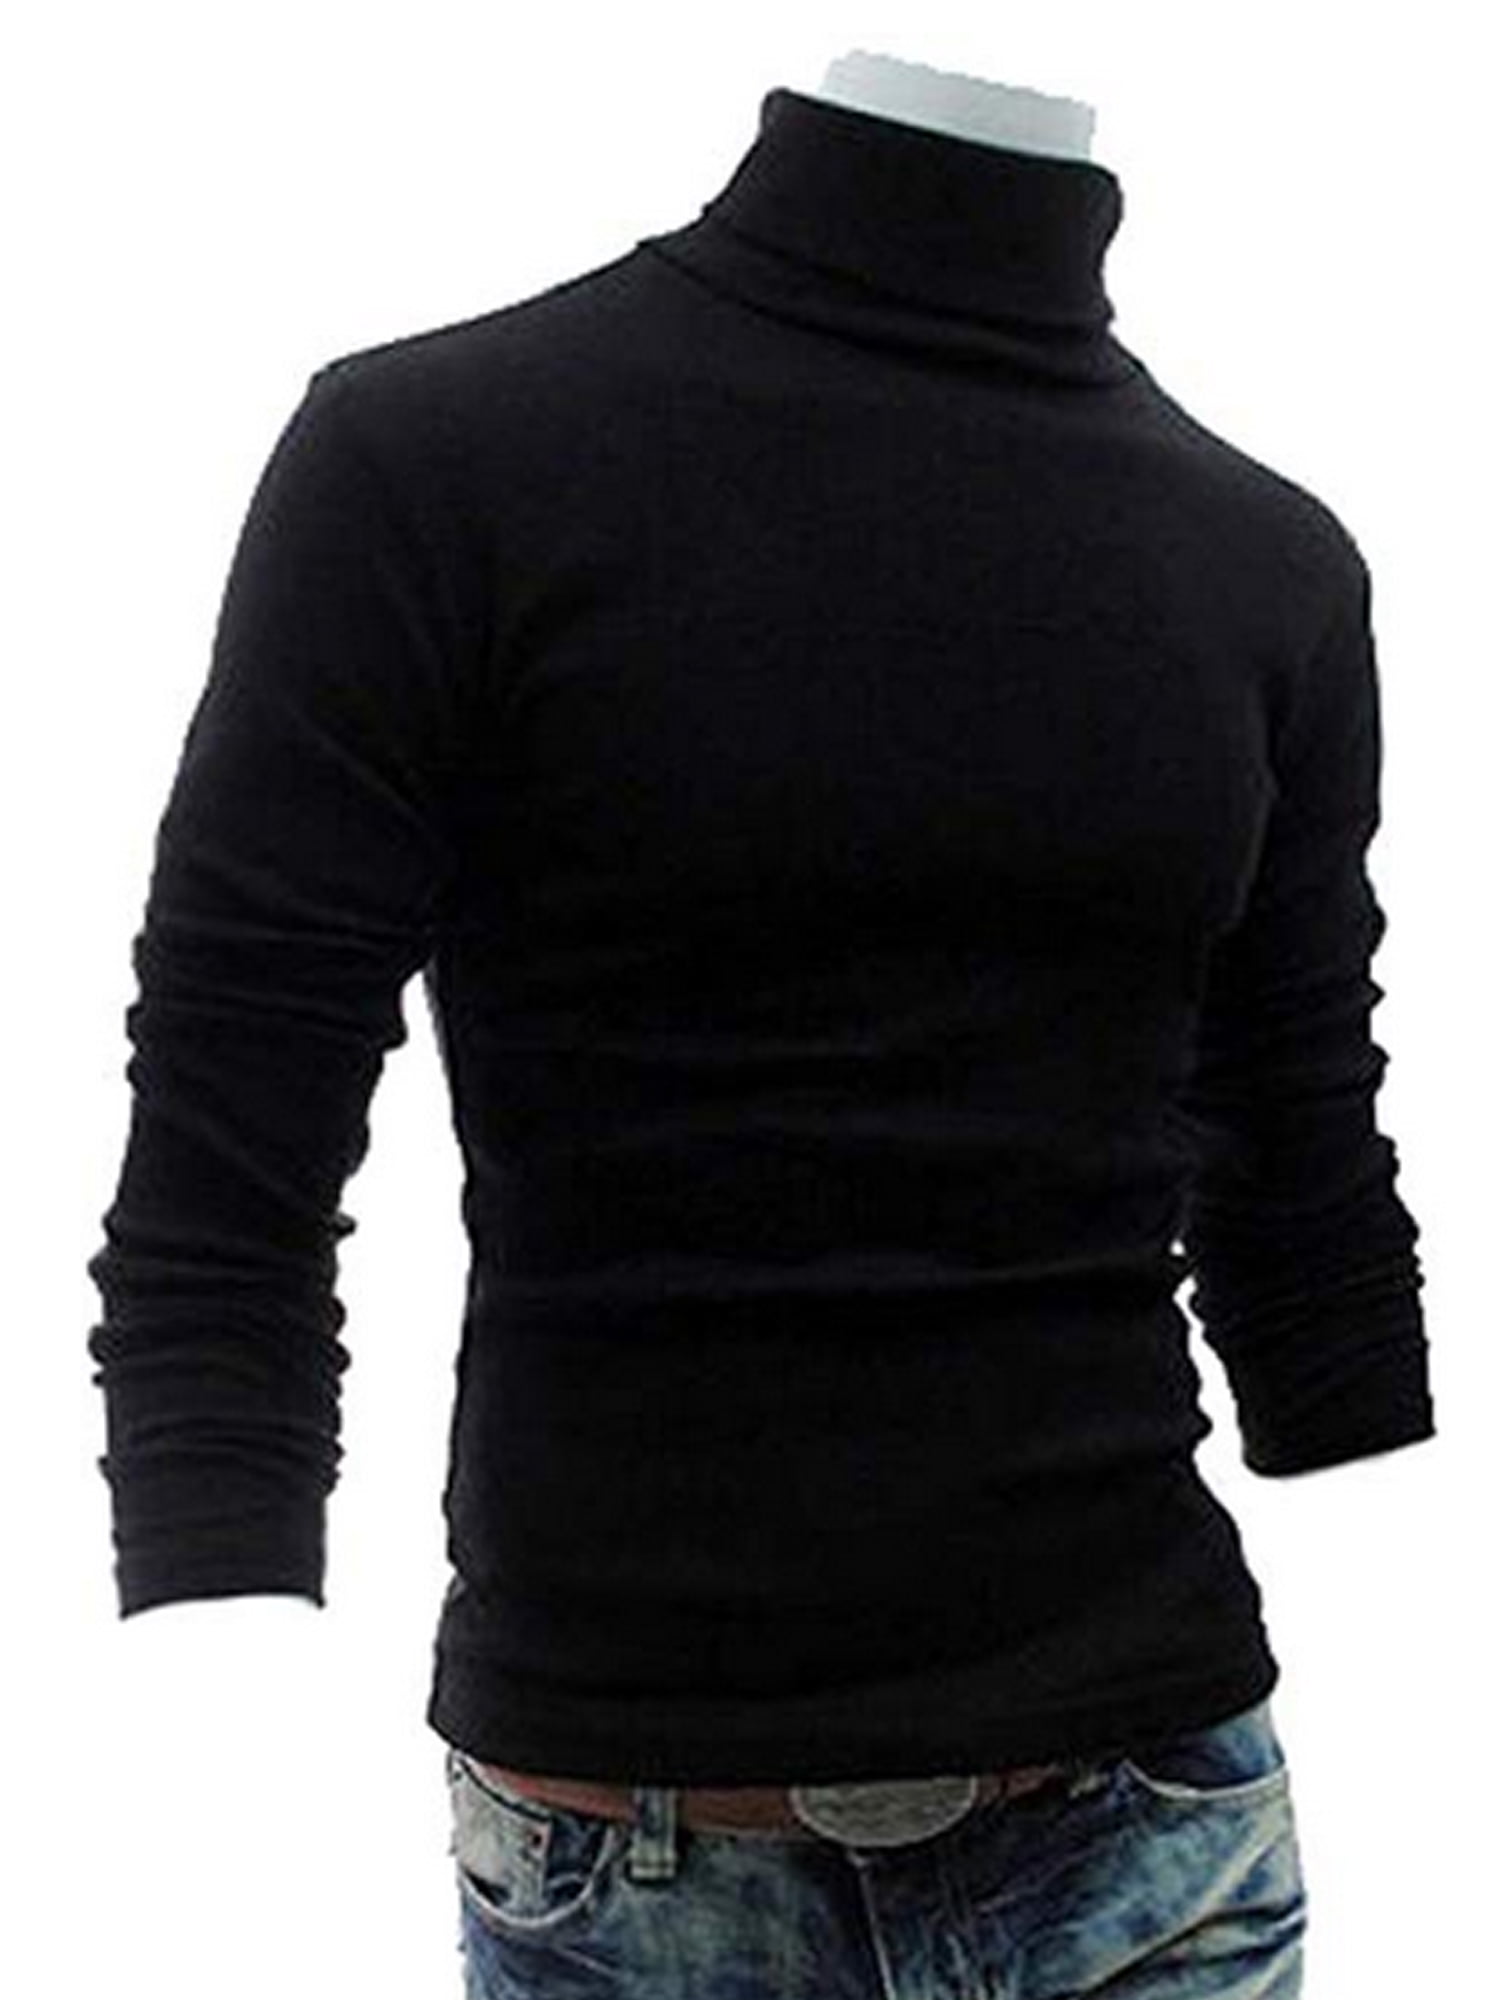 lovever Mens Basic Turtleneck Ribbed Slim Fit Knitted Pullover Thermal Sweater